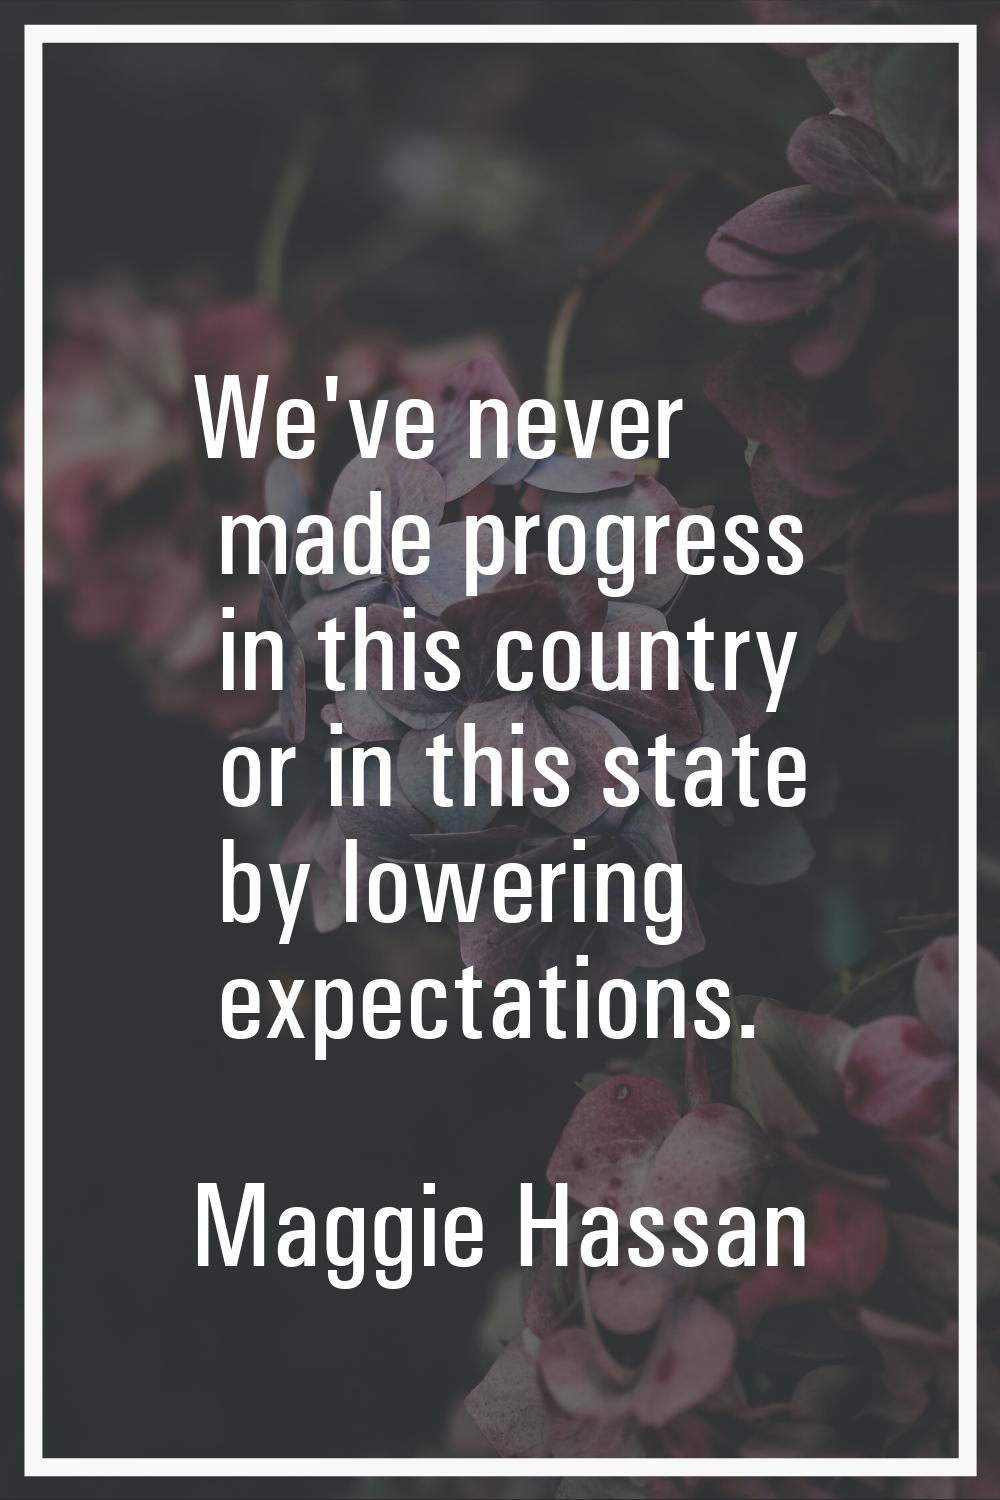 We've never made progress in this country or in this state by lowering expectations.